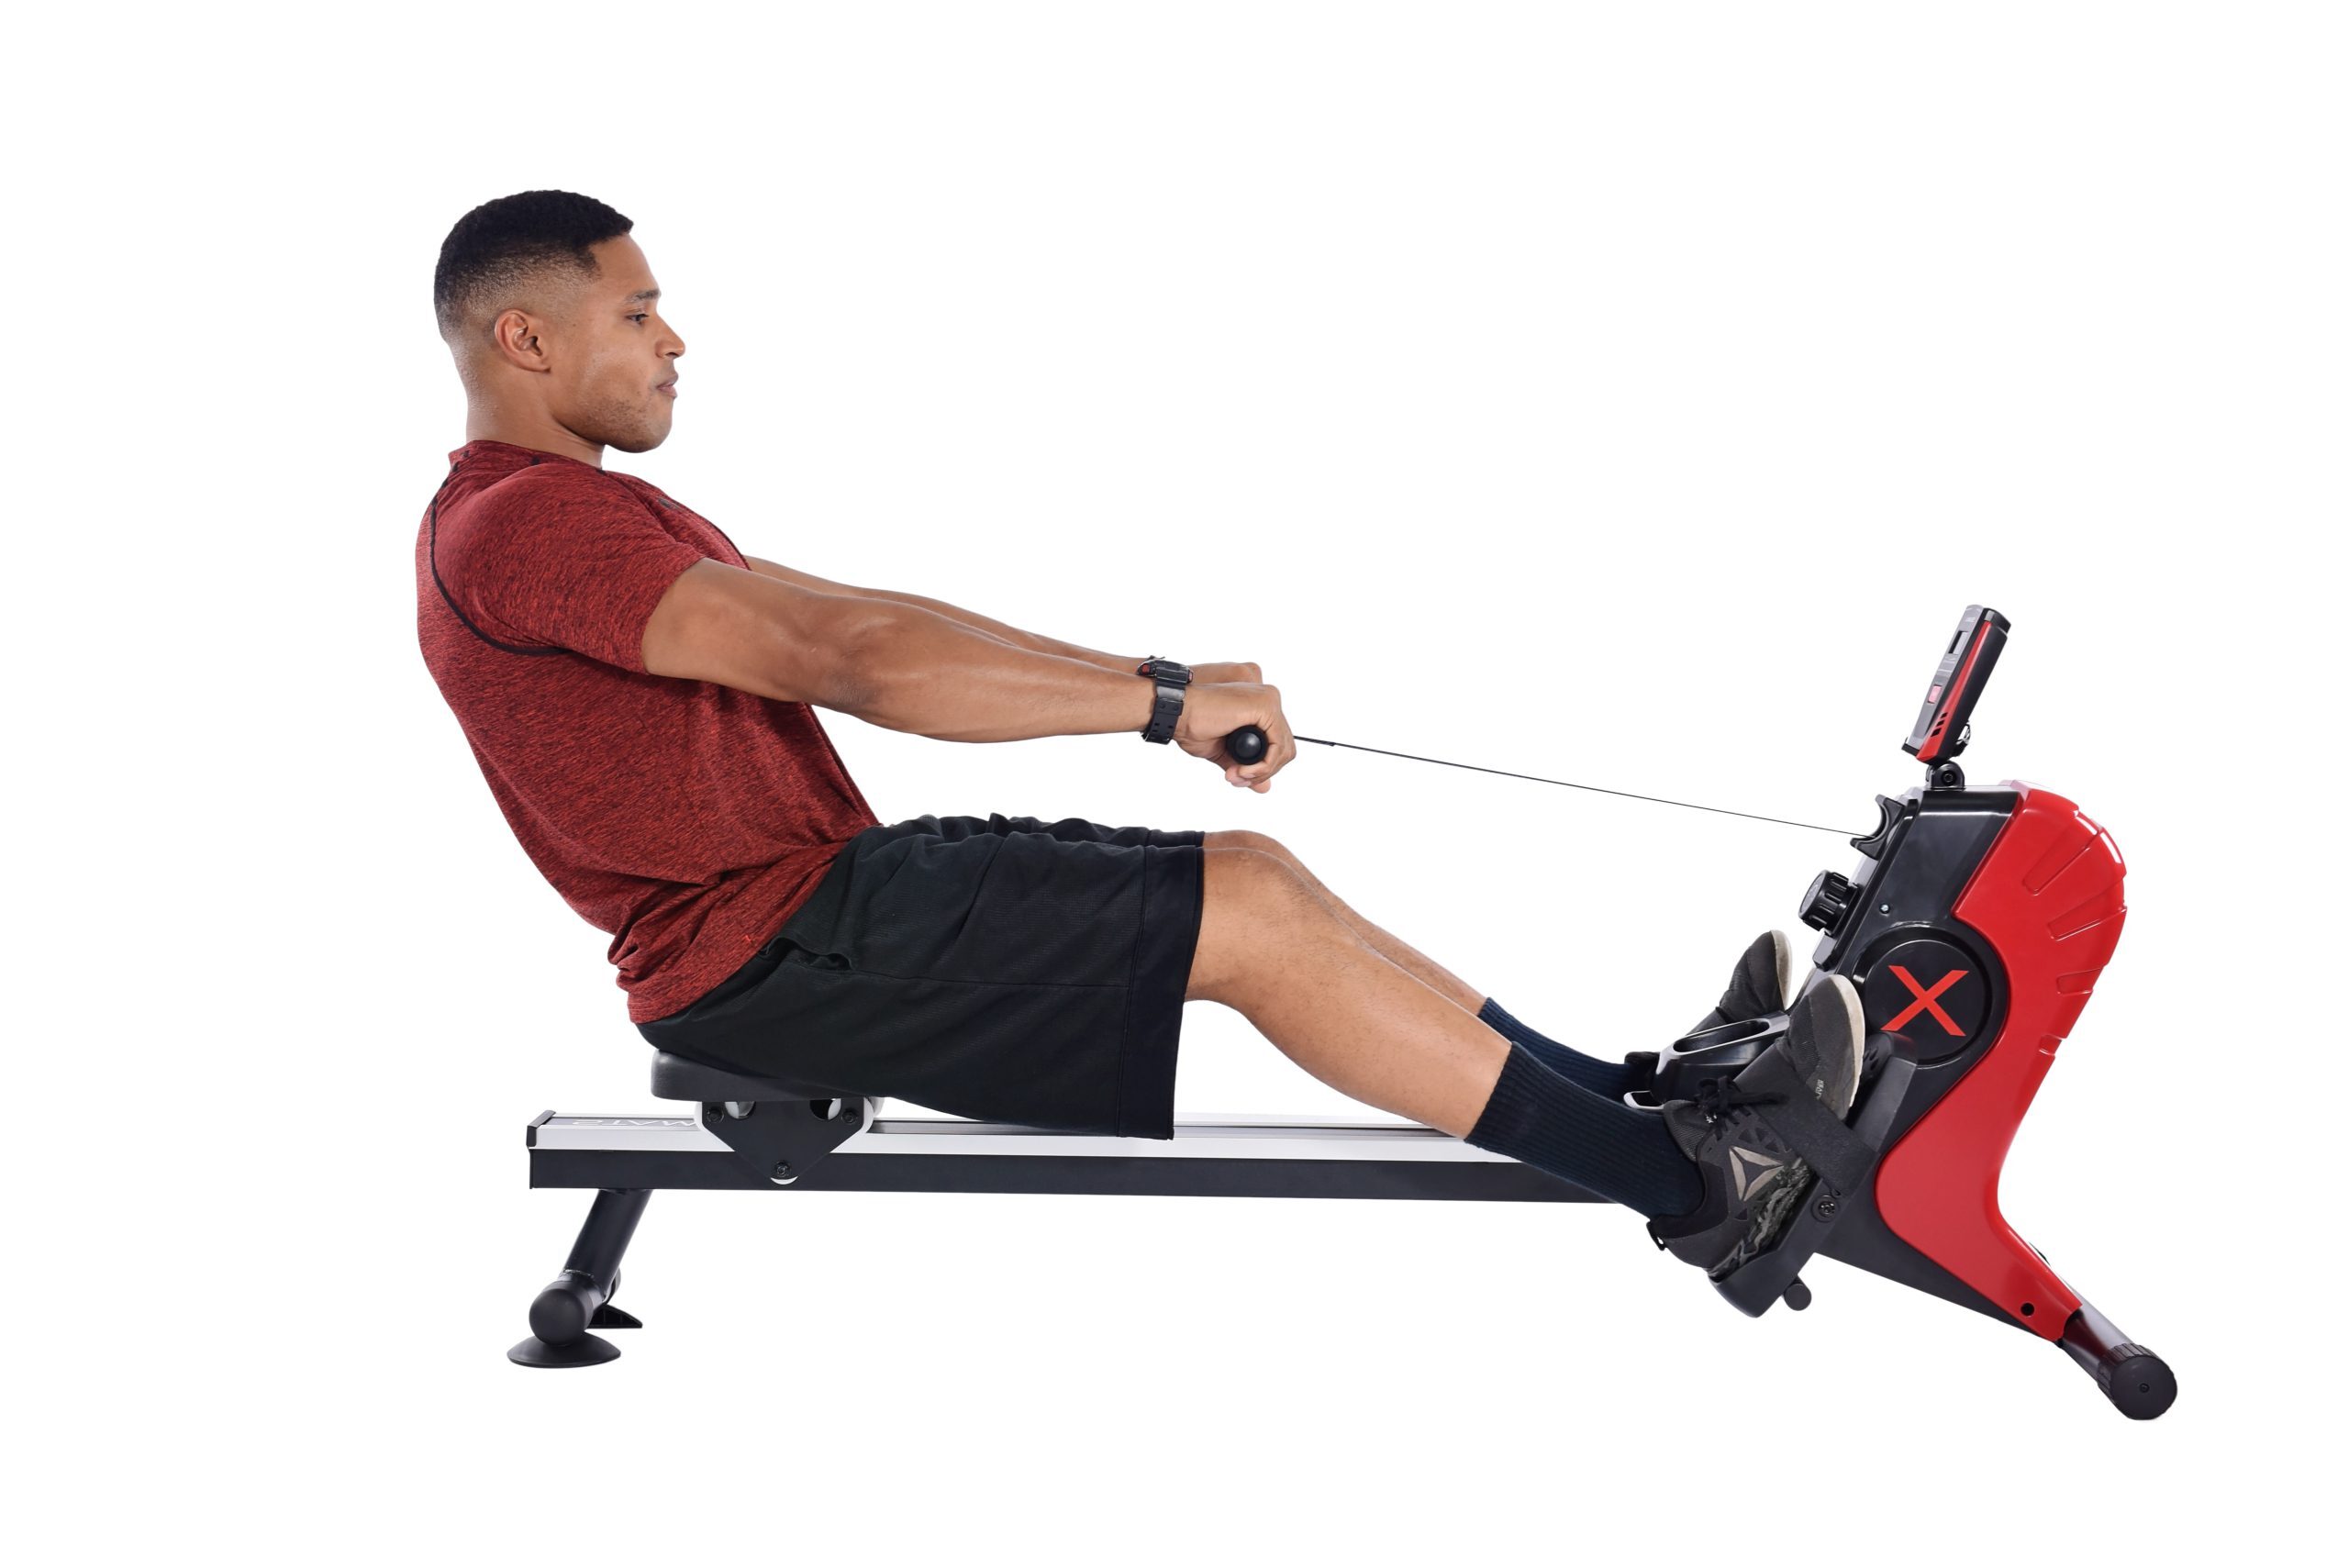 Get Fit At Home With The Stamina X Magnetic Rower